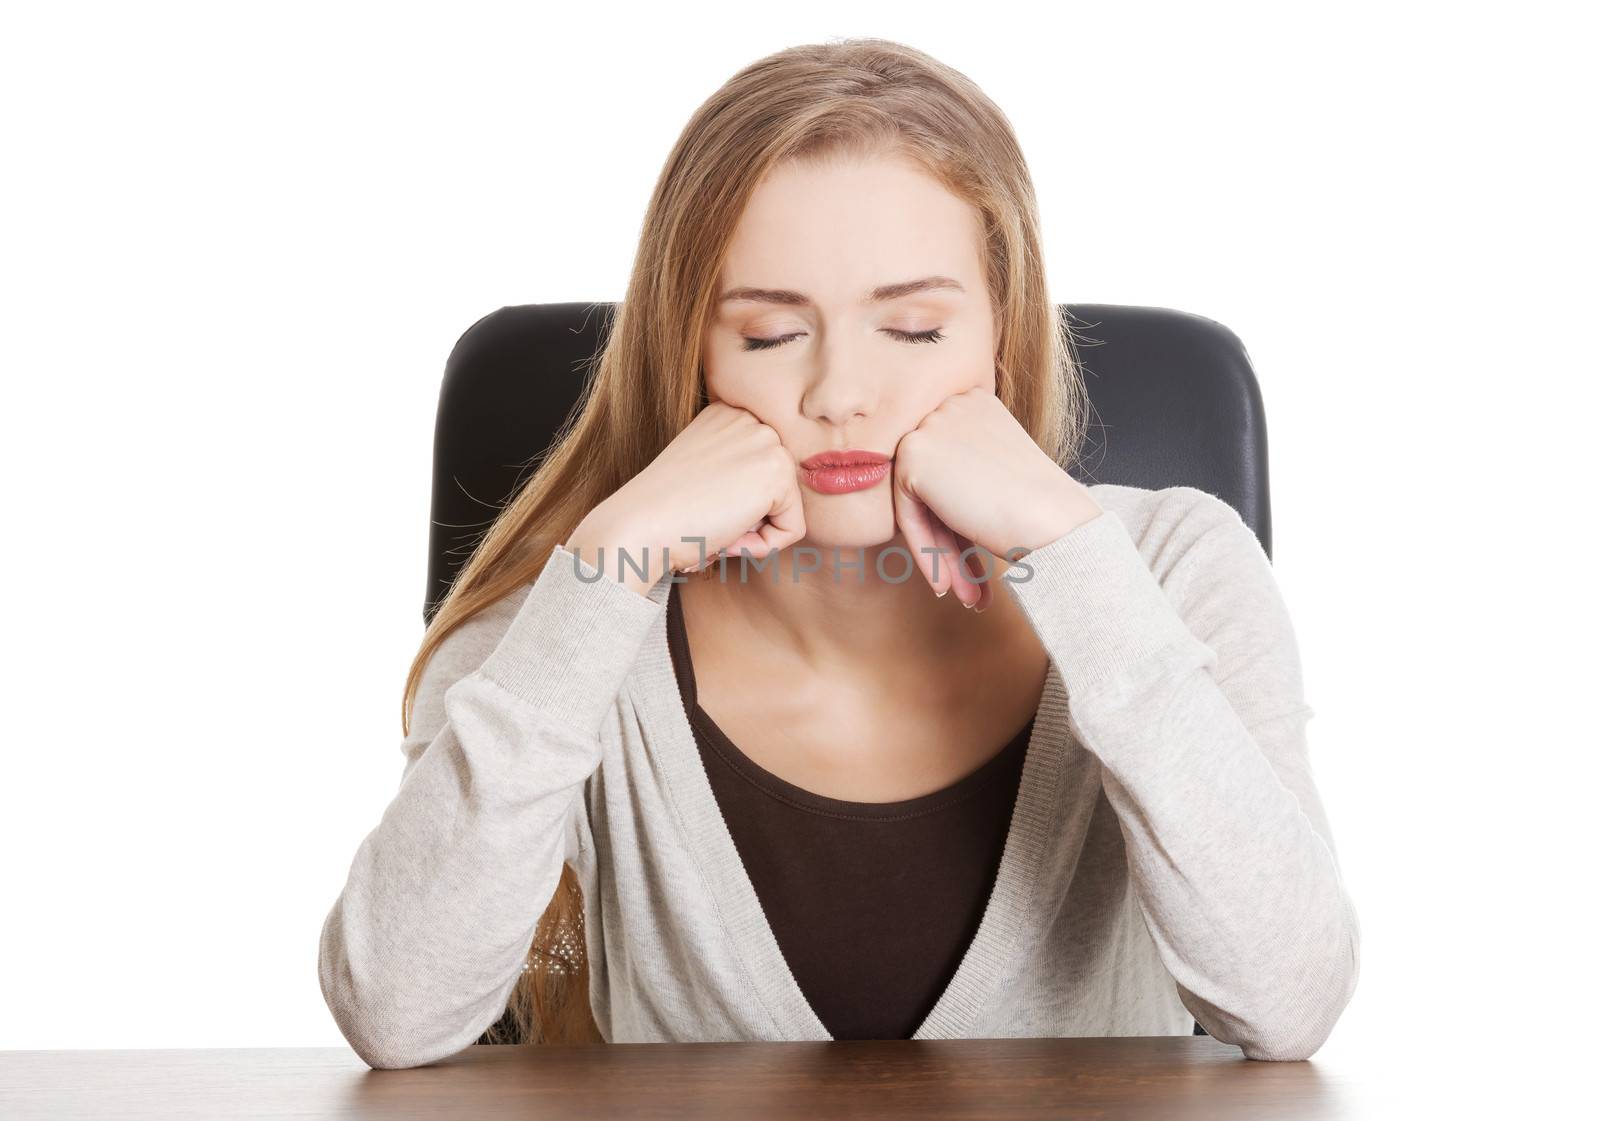 Beautiful casual, bored or sleeping student woman by a desk. Isolated on white.